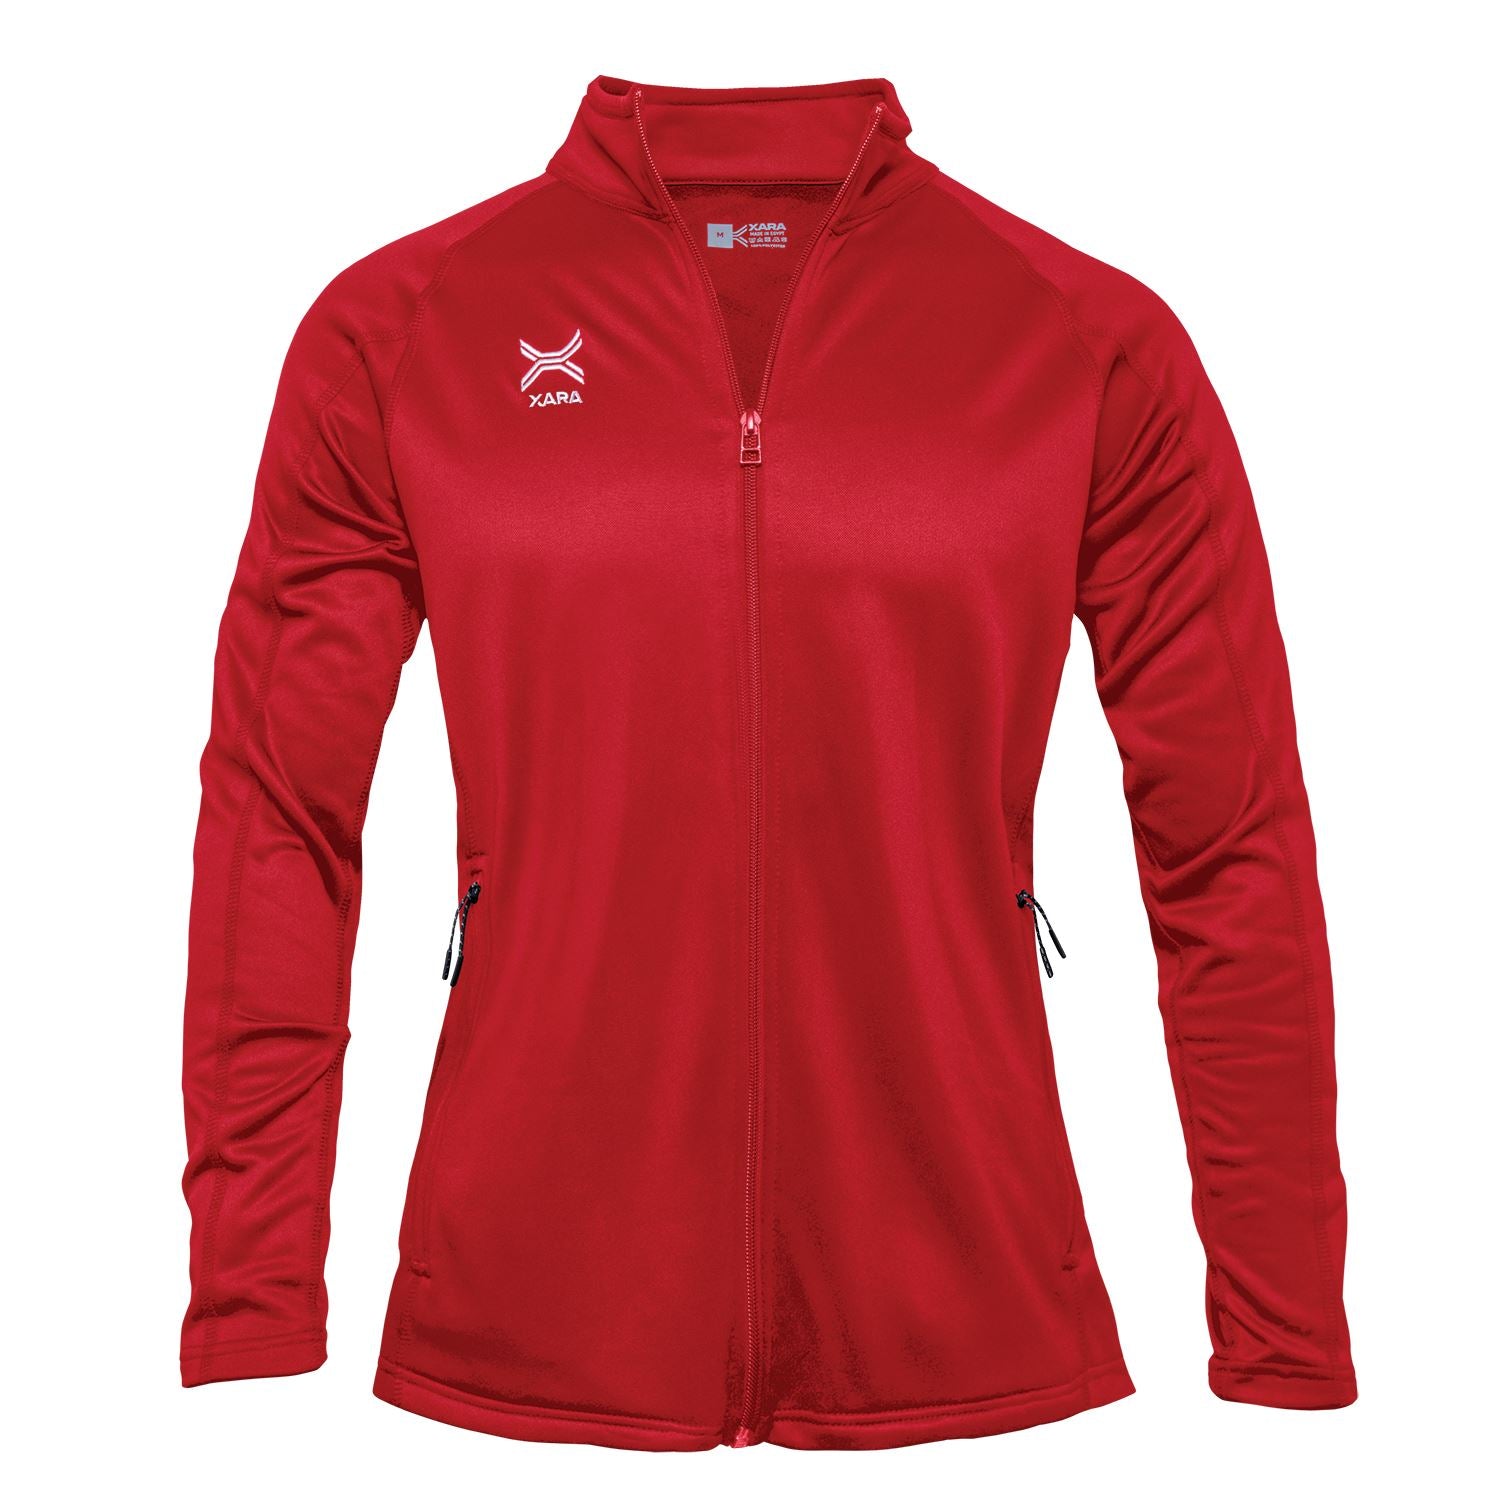 St. James Jacket - Men & Women Outerwear Xara Soccer Red Youth Extra Small Womens